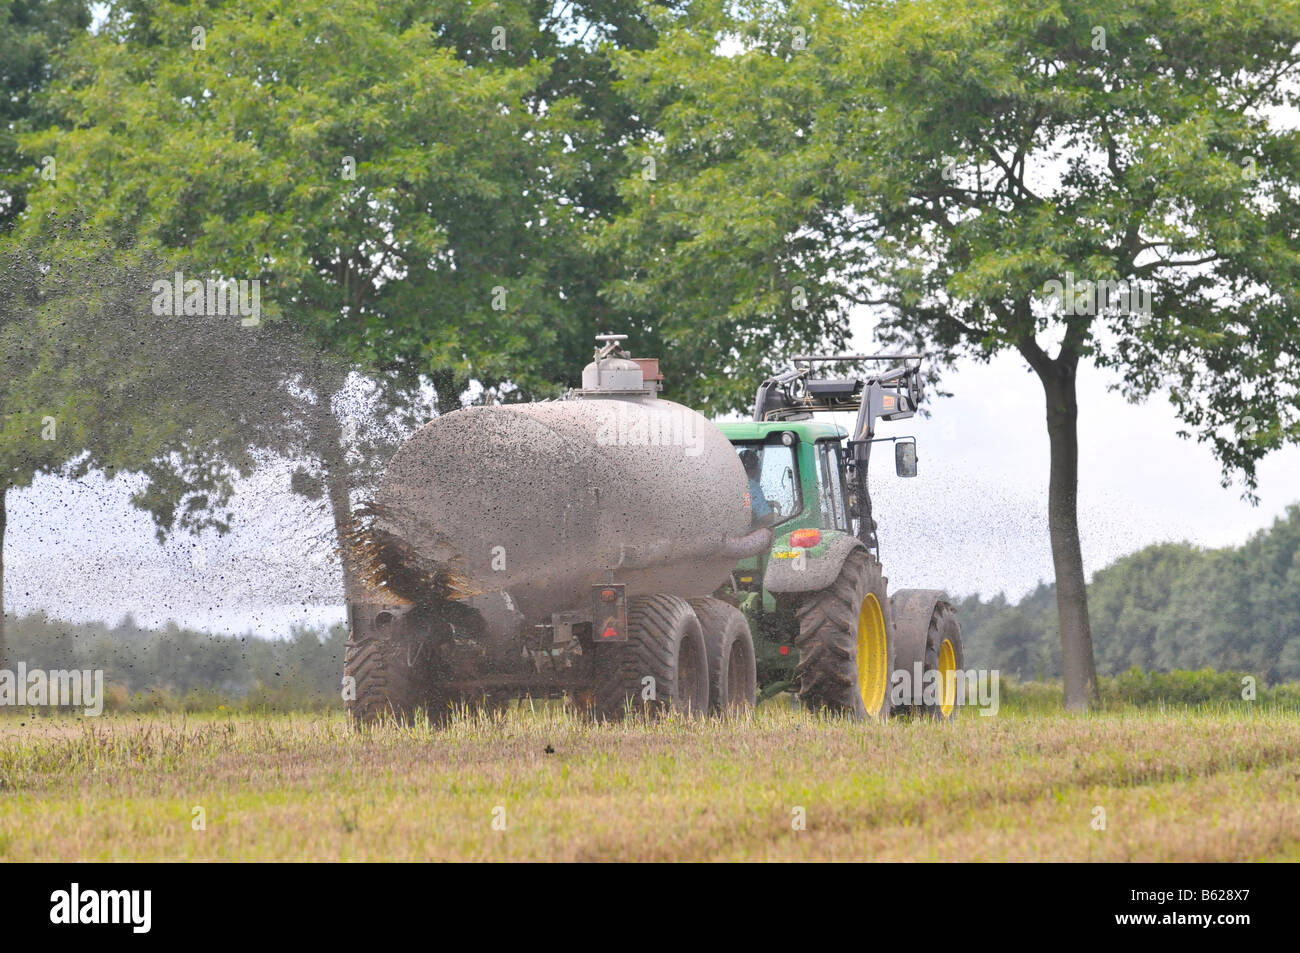 Farmer spreading manure over a harvested field Stock Photo